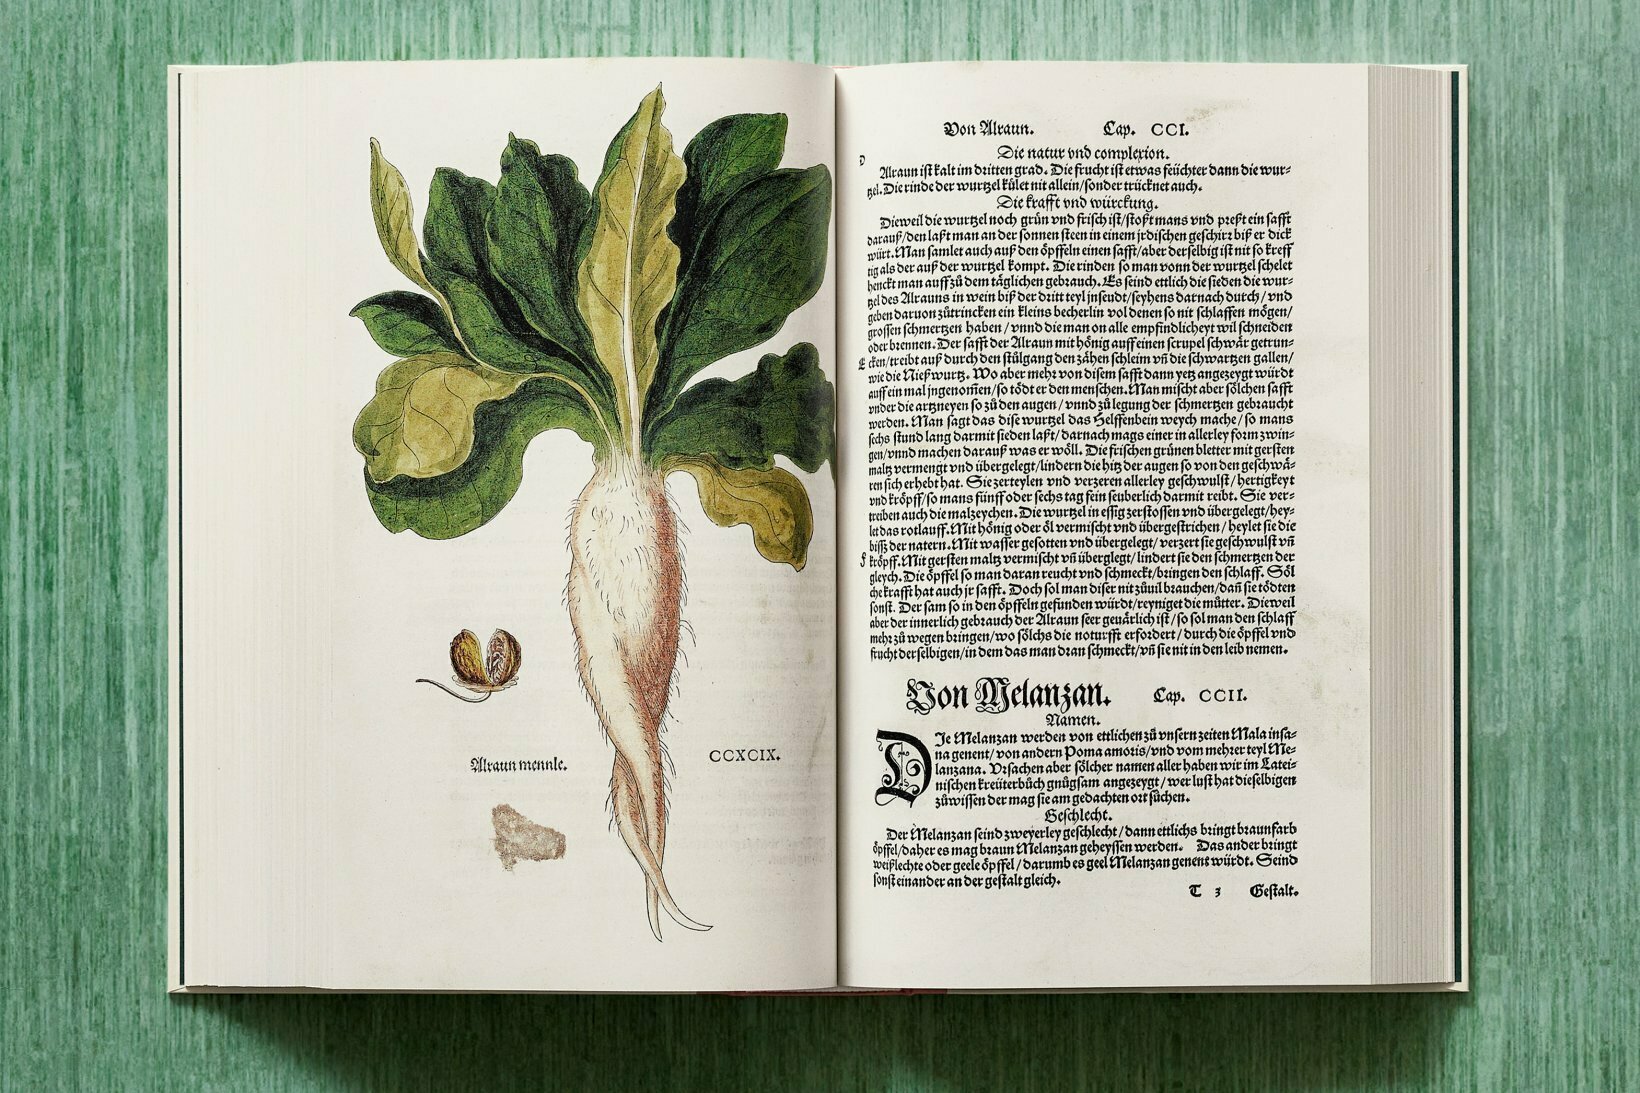 New Herbal: A Masterpiece of Renaissance Botanical Illustrations Republished in a Beautiful 900-Page by Taschen | Open Culture